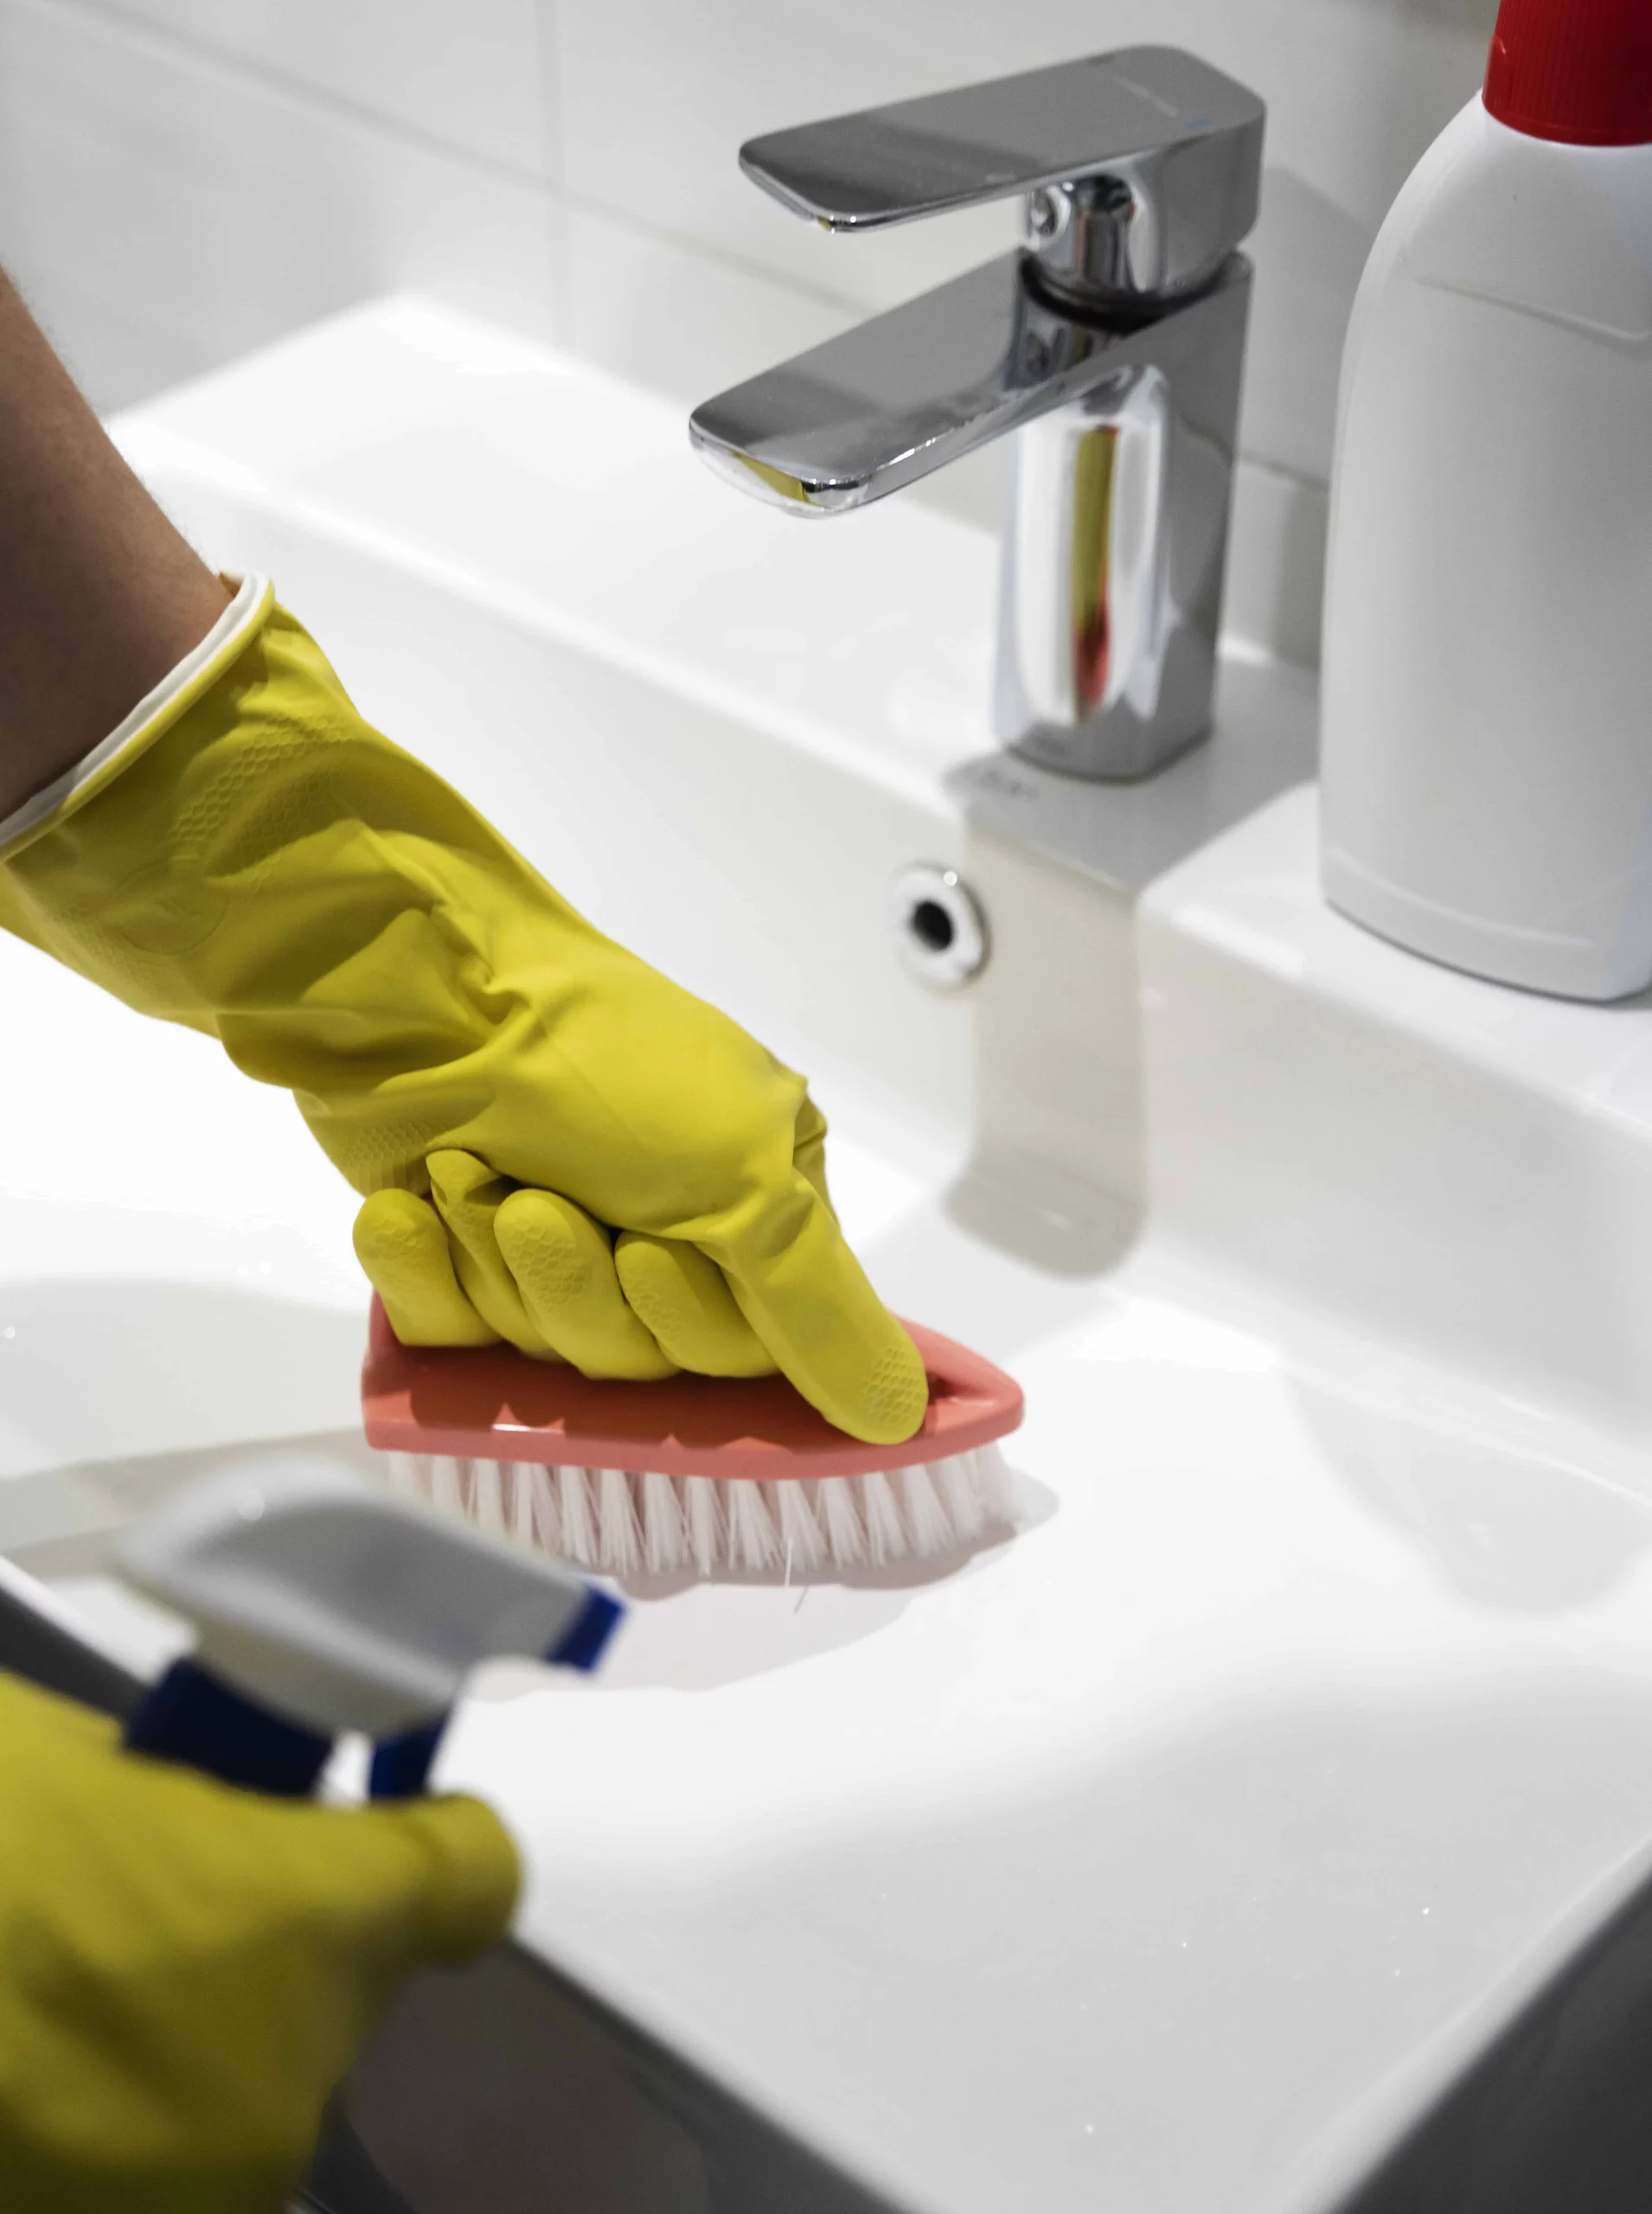 person's hands in cleaning gloves using a scrubber to clean the bathroom sink